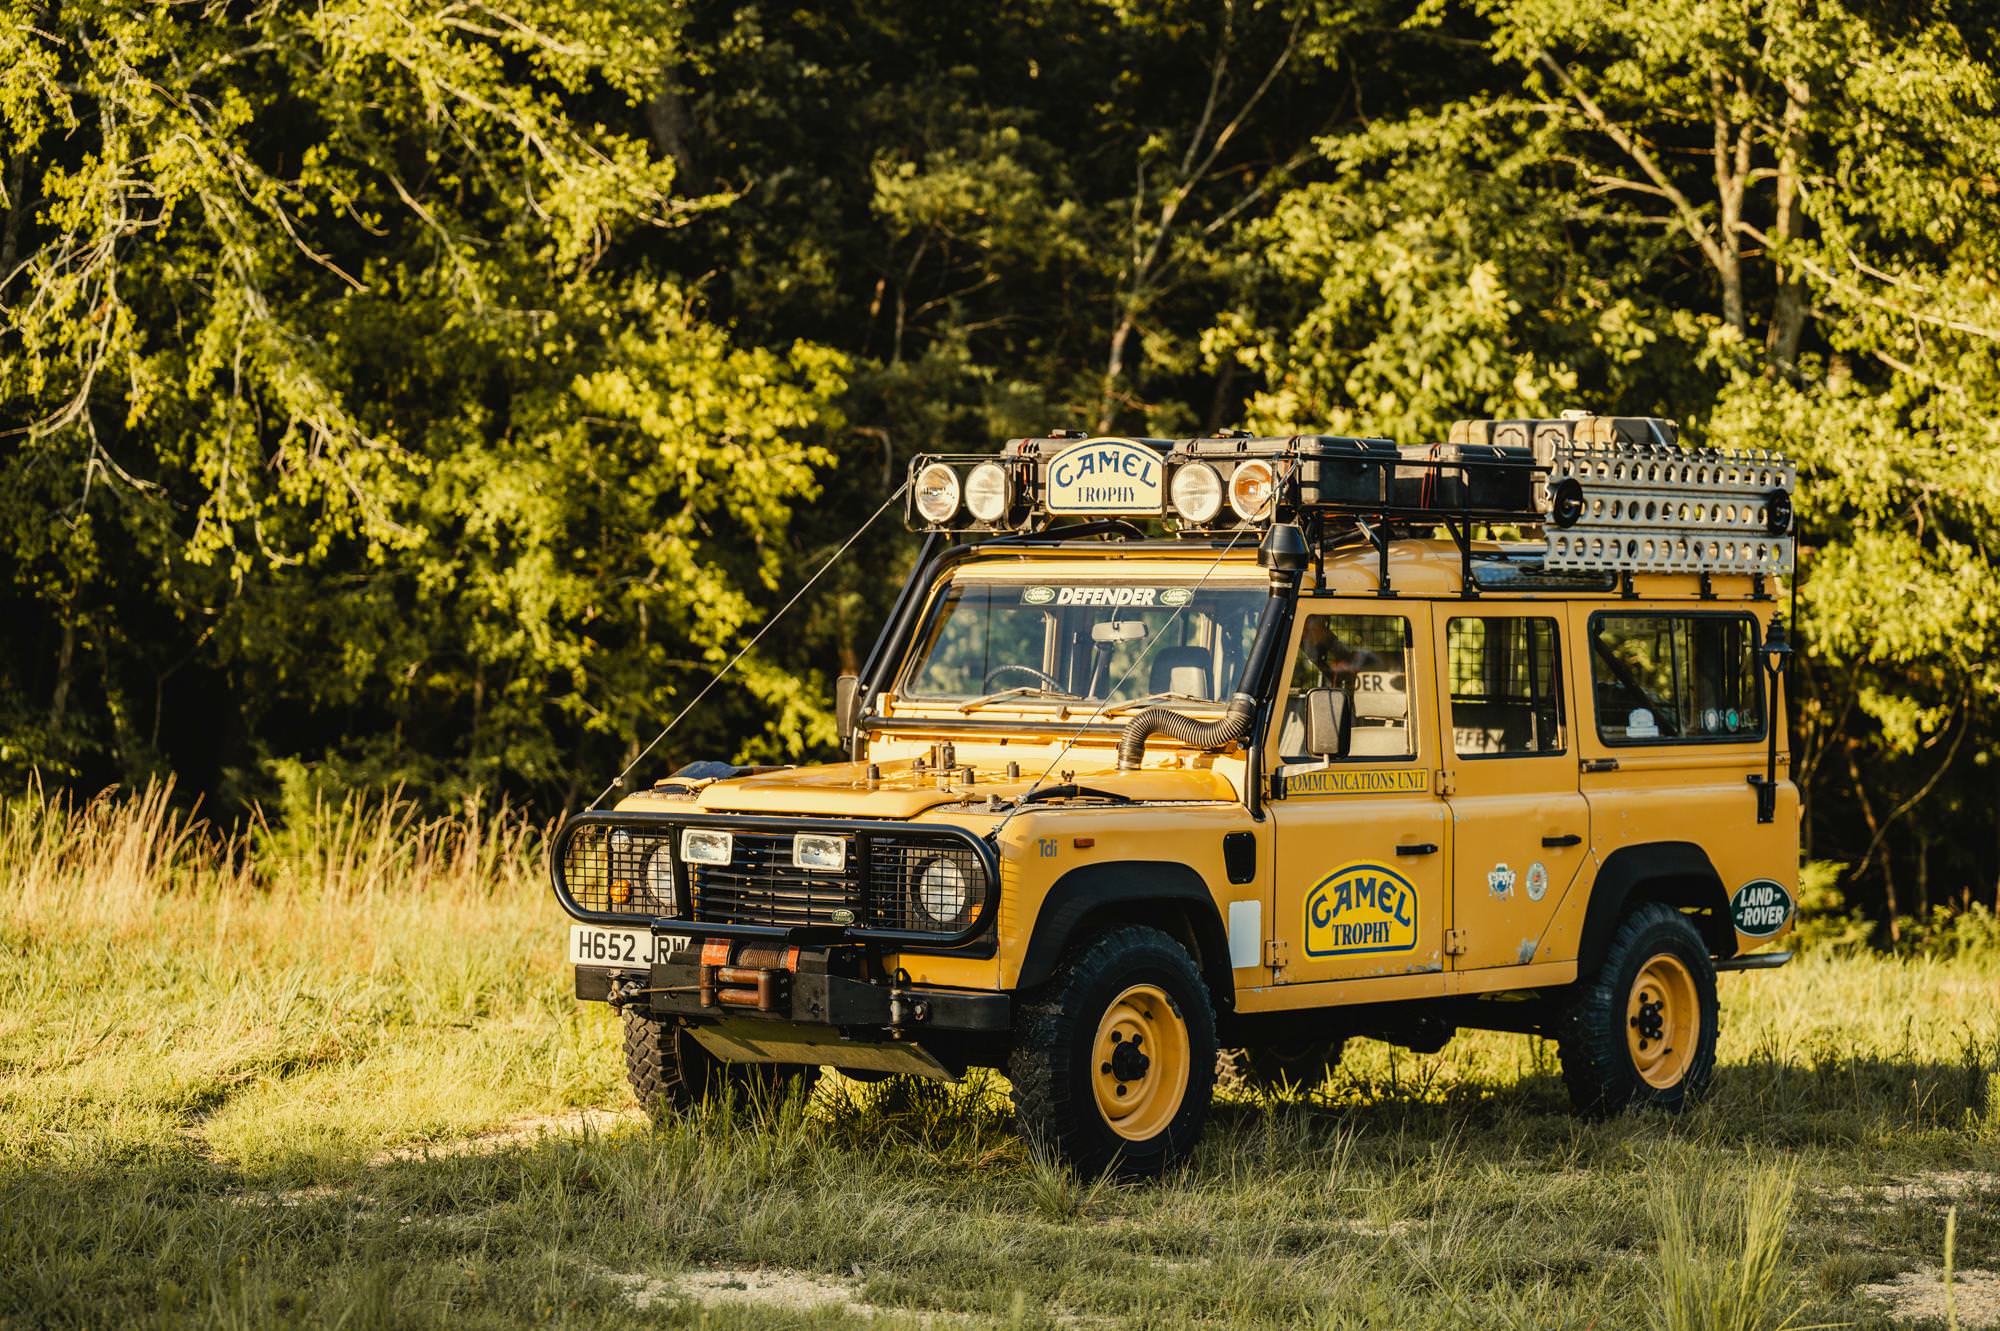 There's An Land Defender For Sale